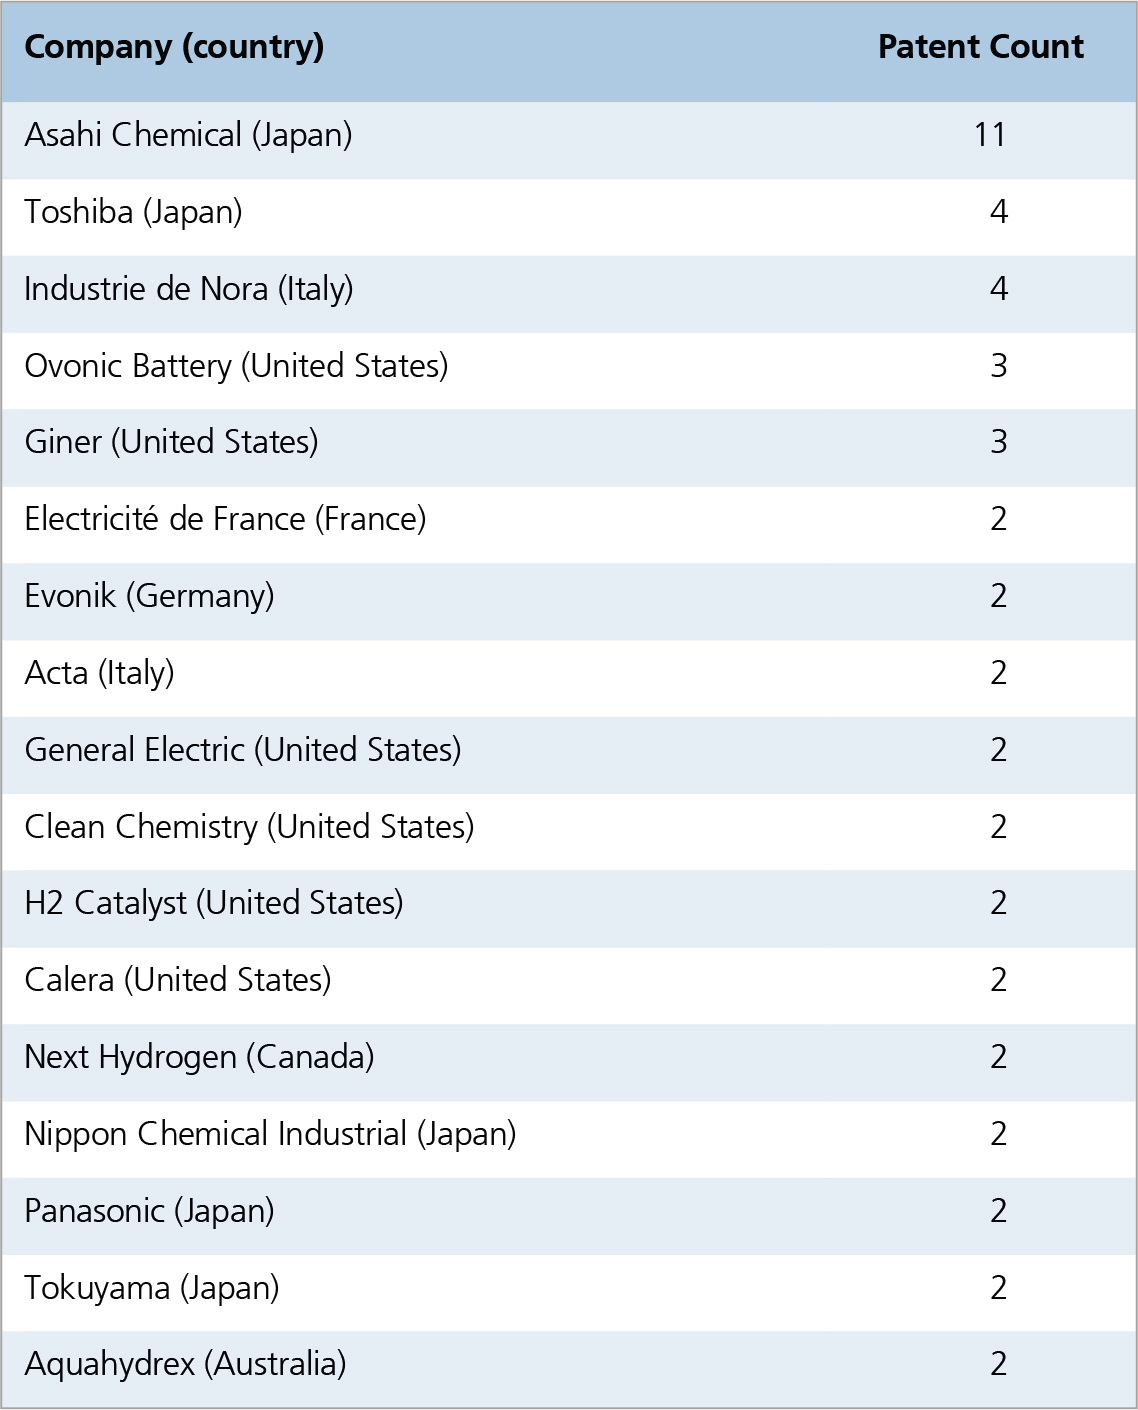 Table 3: Top industrial applicants for alkaline electrolysis patents (two or more patents).